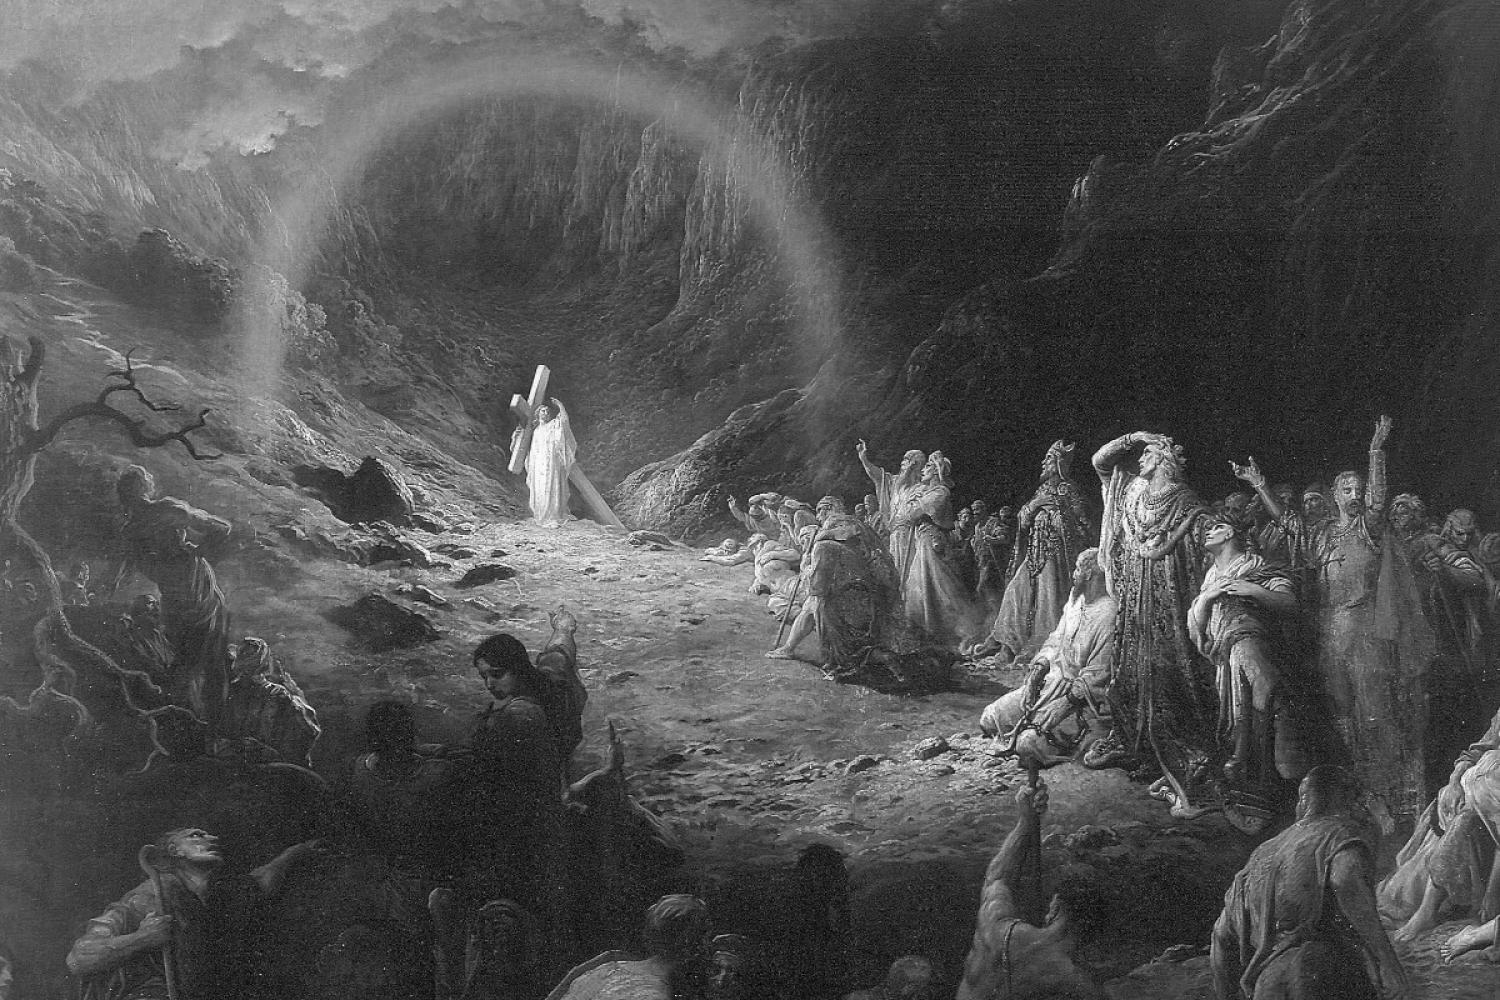 &quot;The Valley of Death,&quot; by Gustave Dore